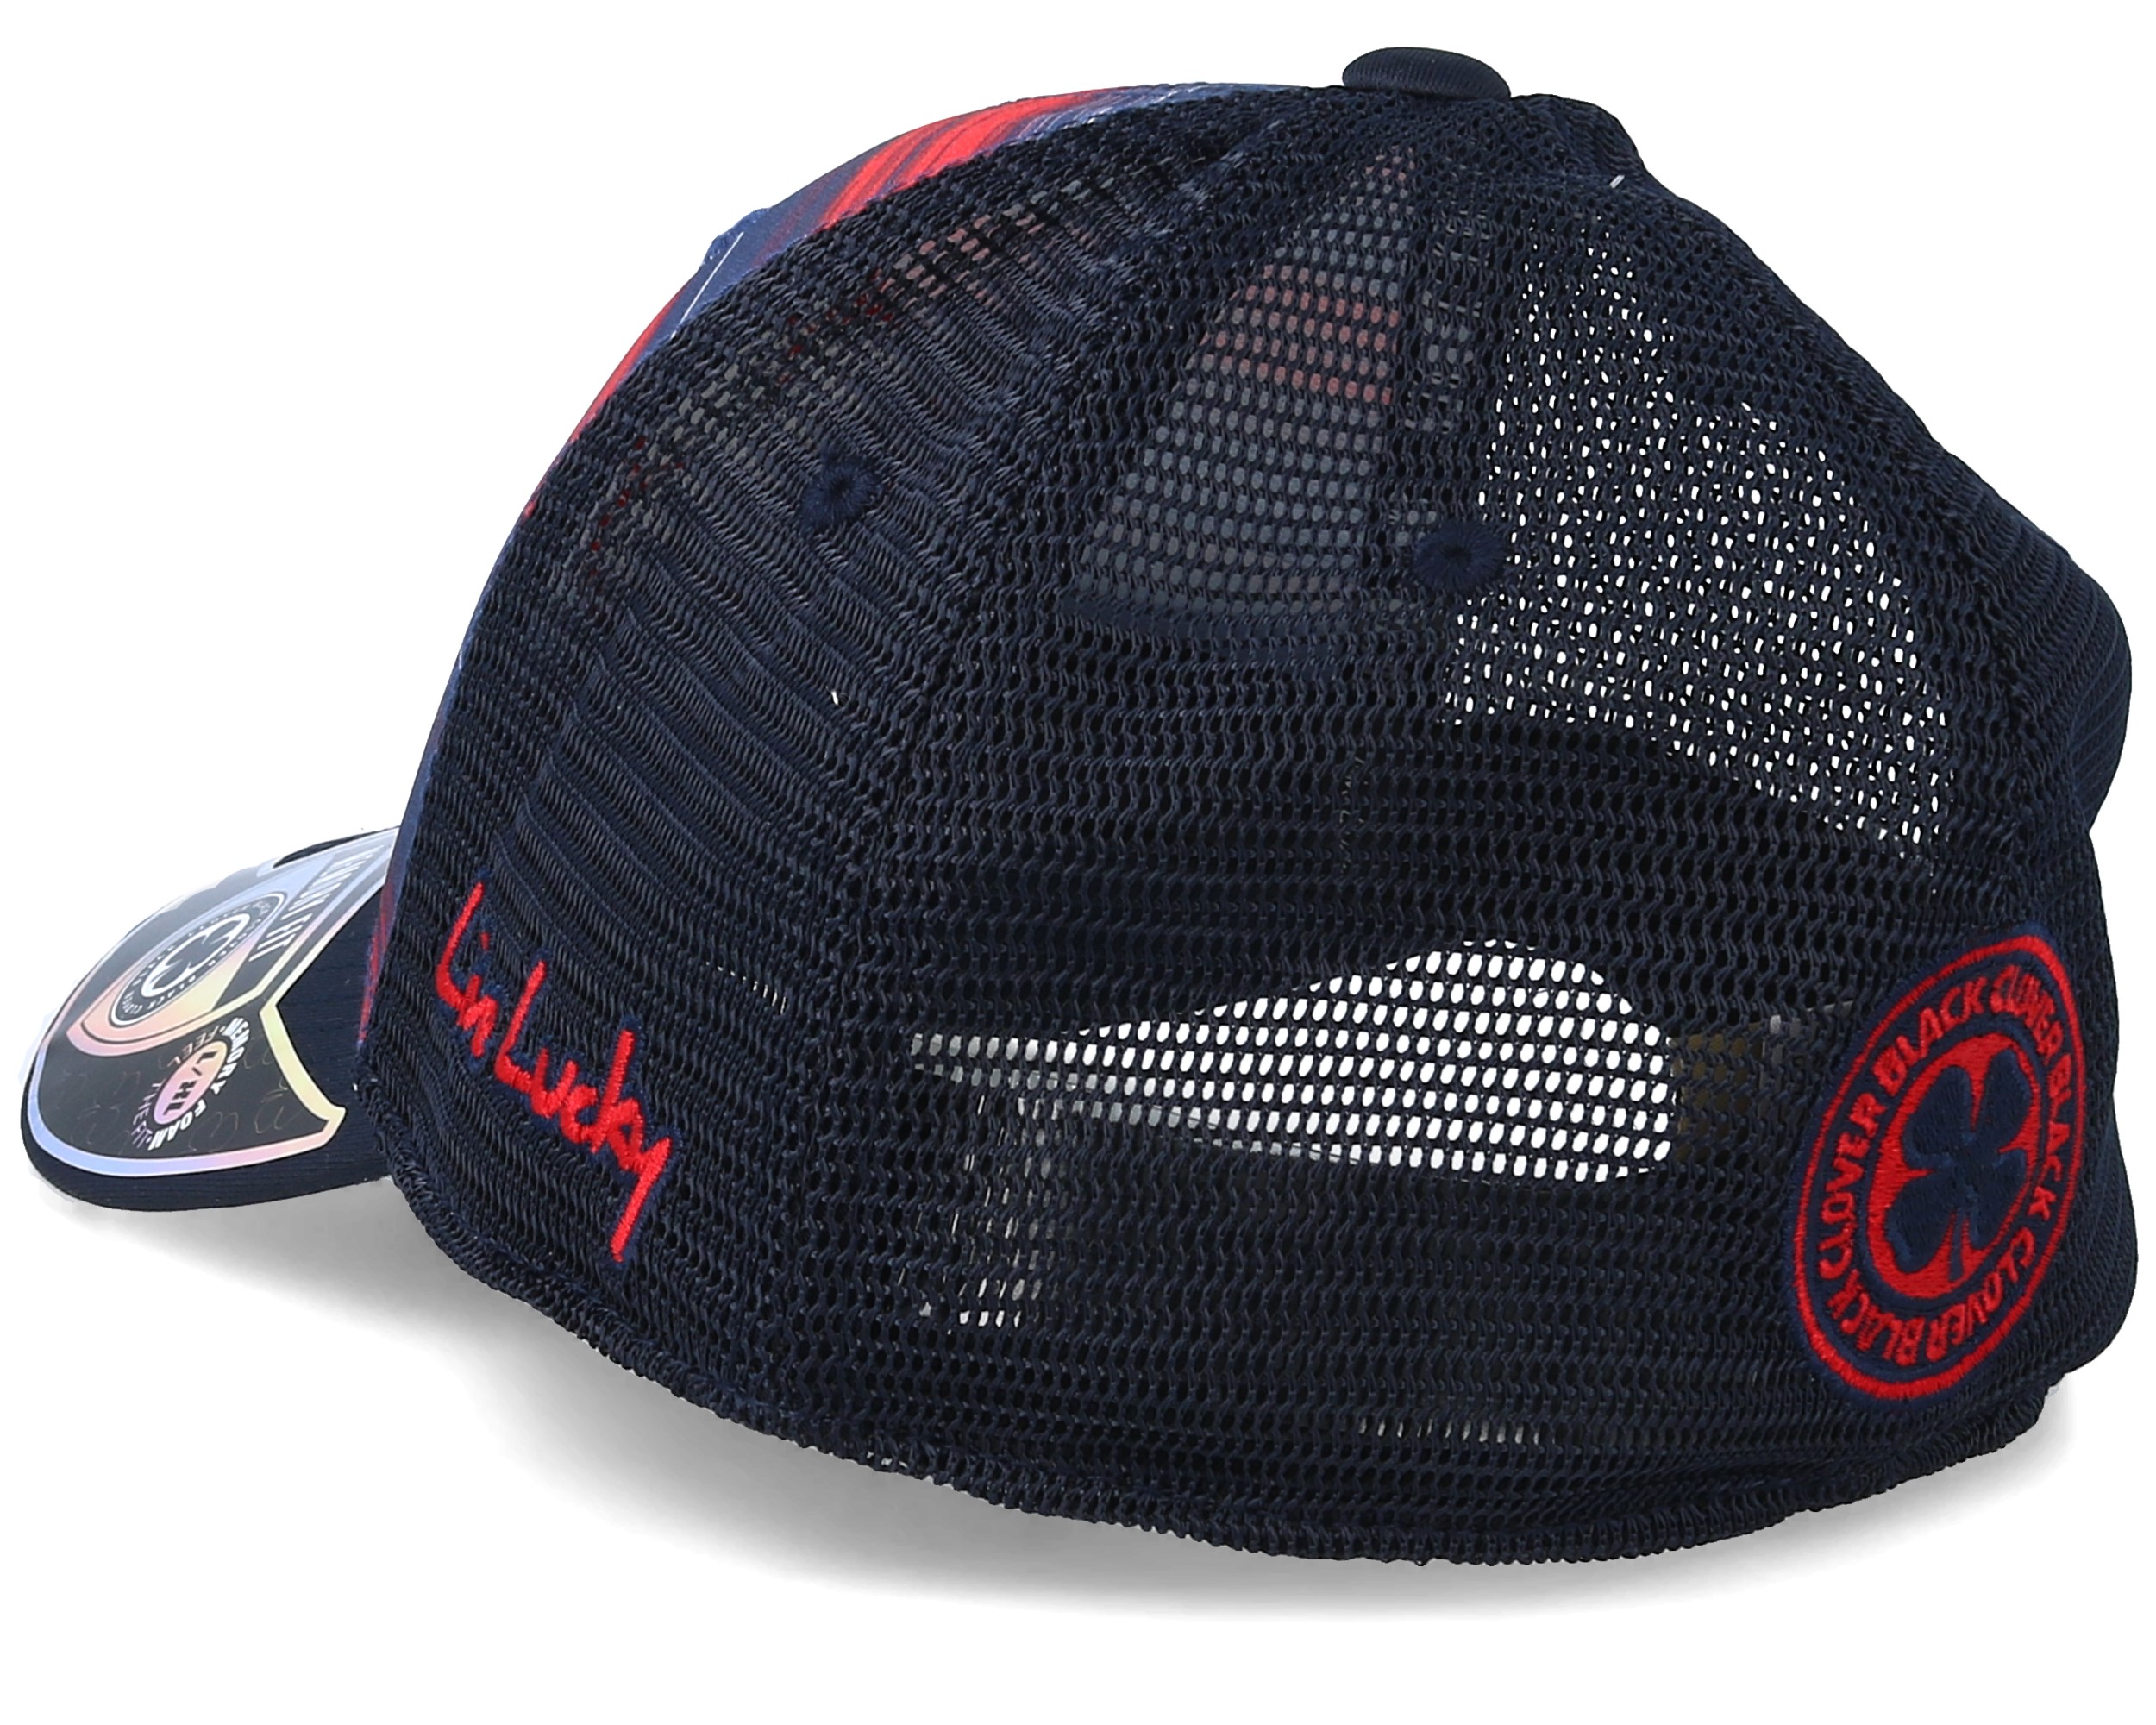 S/M BLACK CLOVER BC Fly Knit 1 Navy/Red Snapback Hat